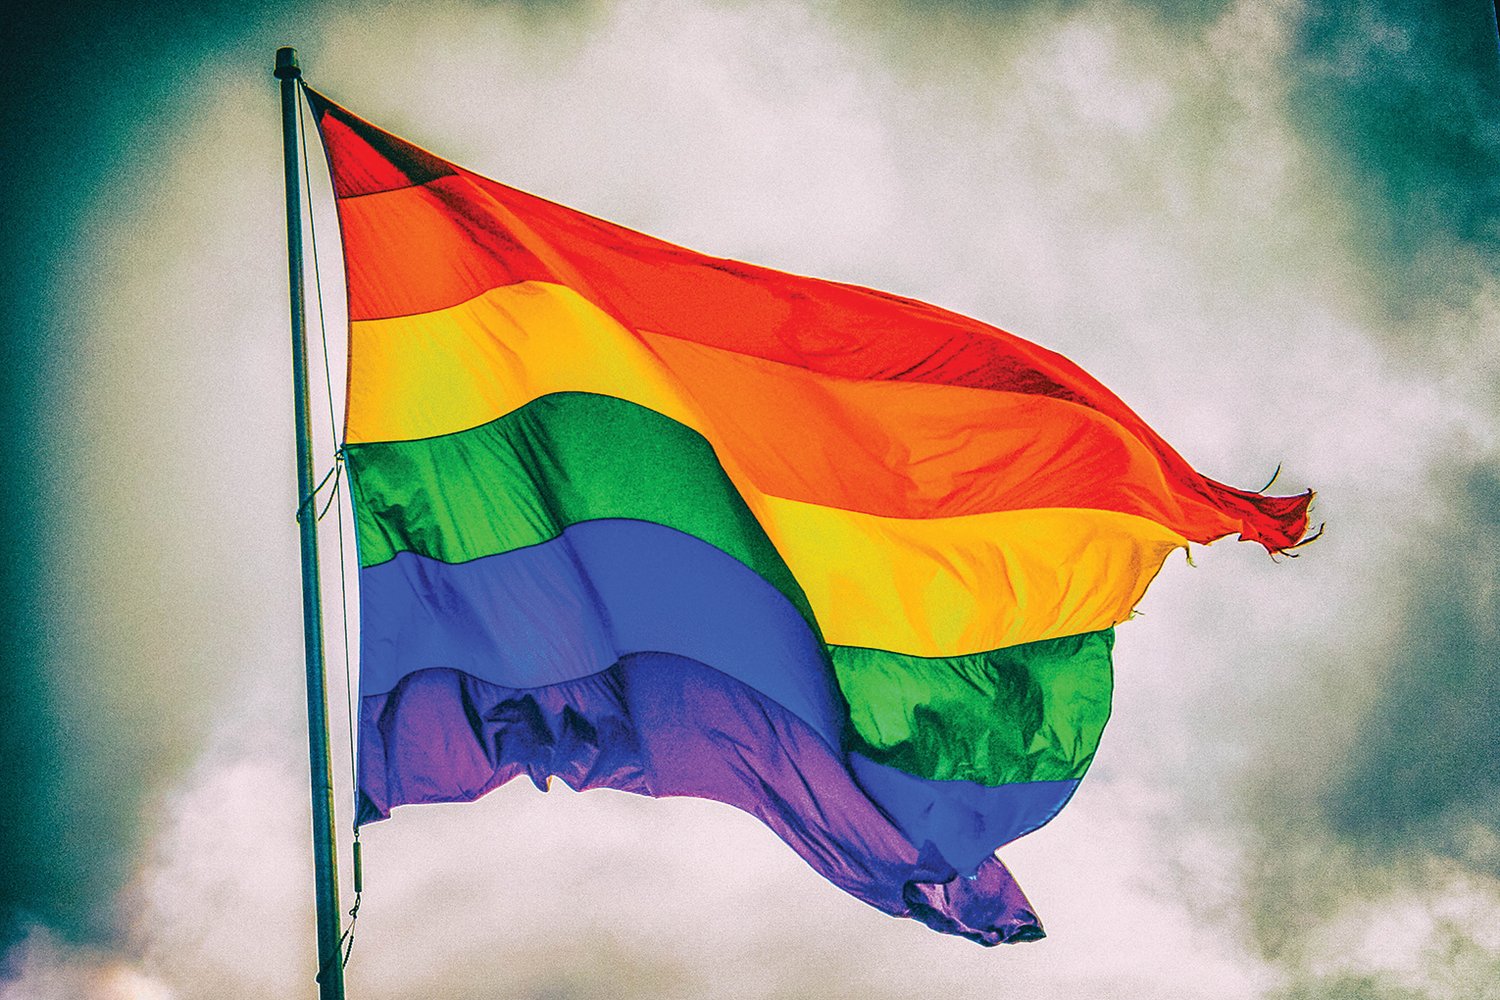 Campaign eyes protections for LGBTQ community | City Pulse